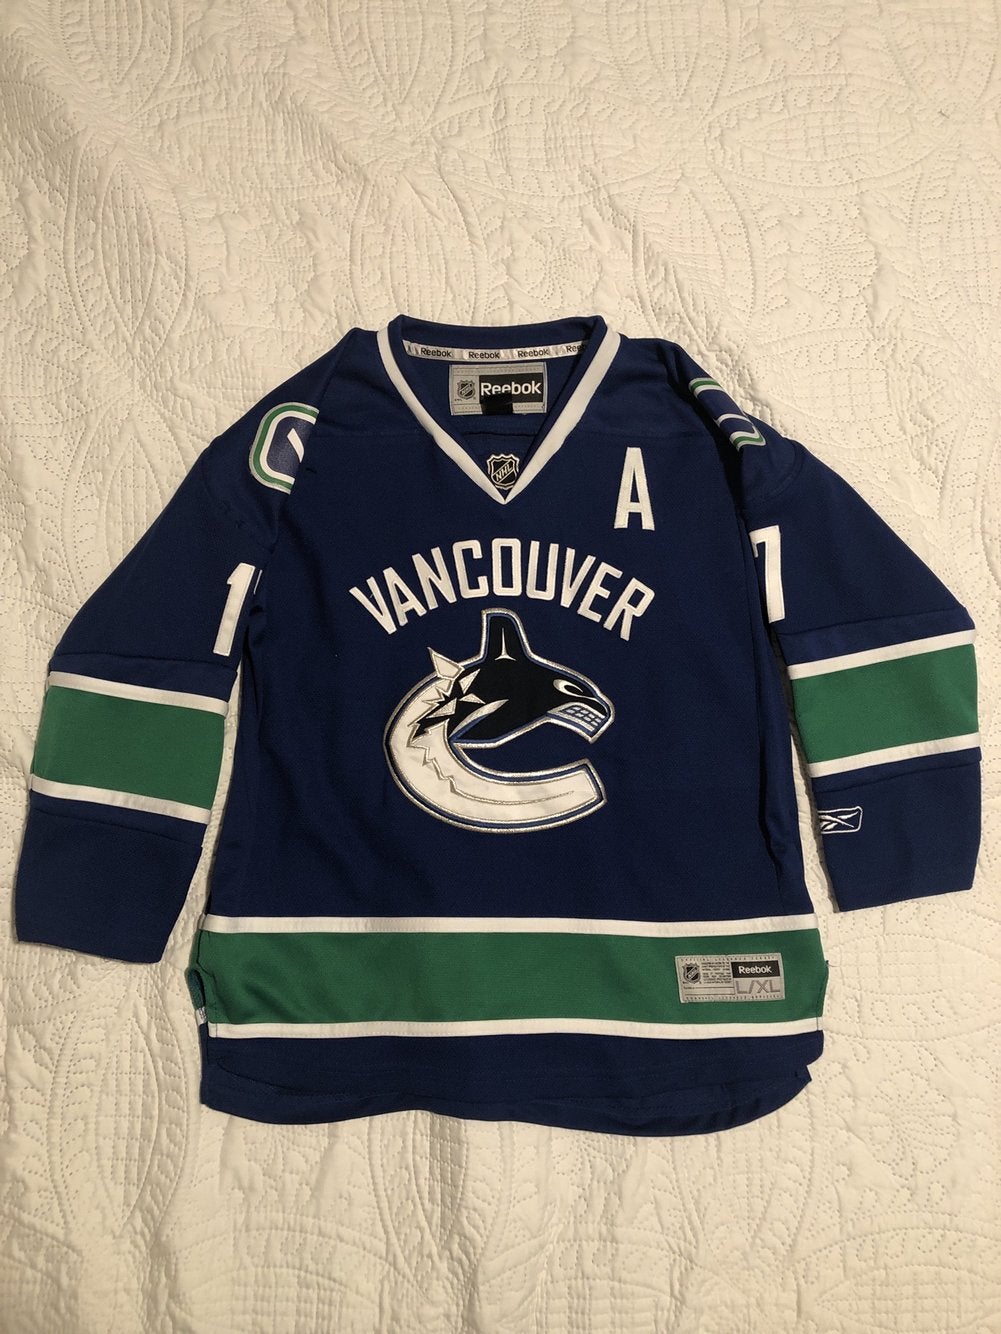 Reebok Hockey Jerseys for sale | New and Used on SidelineSwap